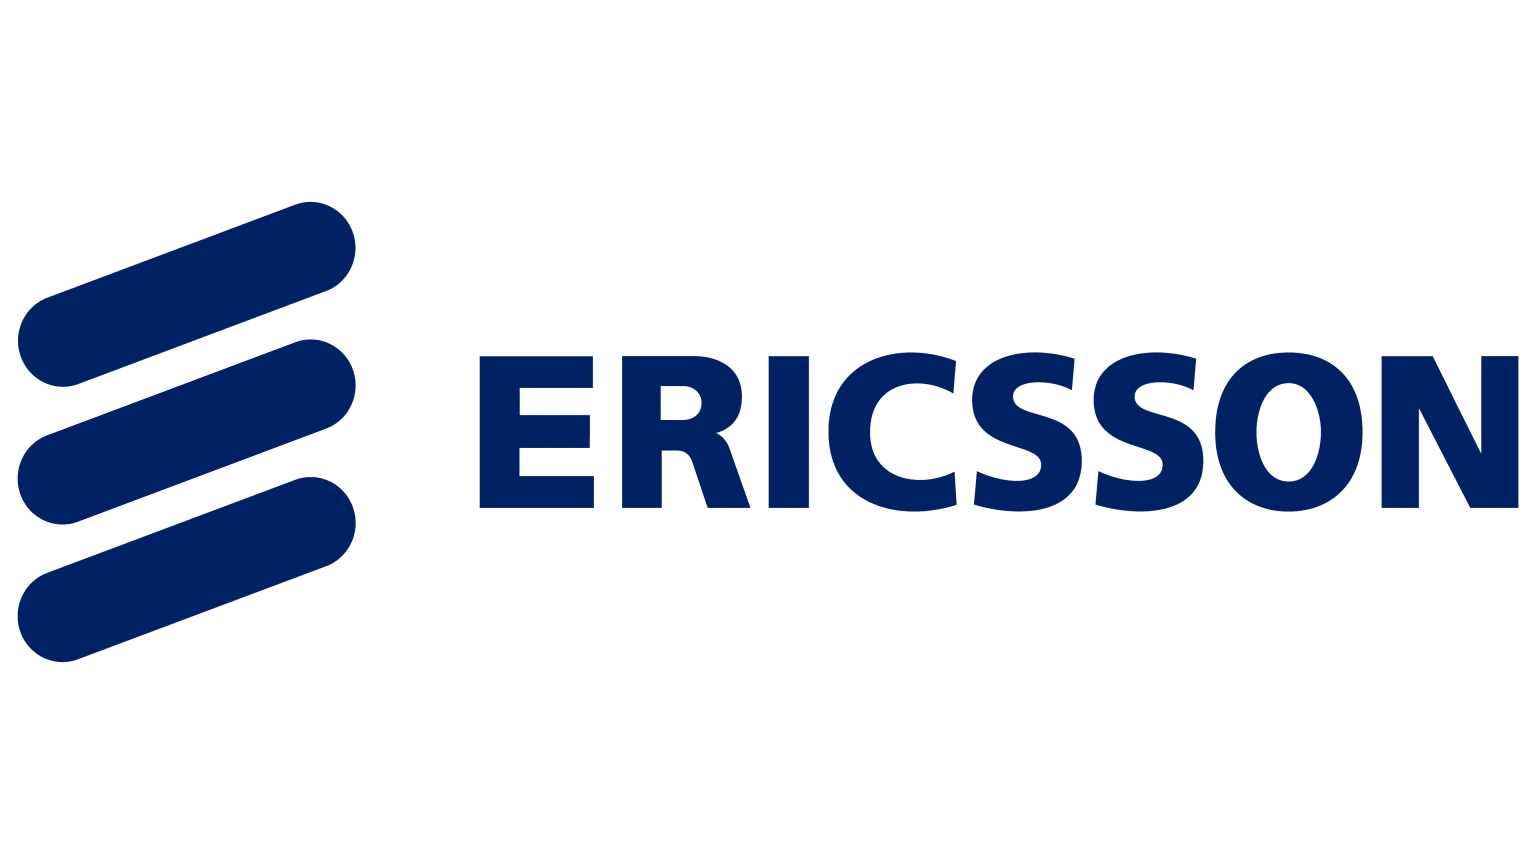 Ericsson CEO says the company might have made payments to ISIS to gain access to transport routes in Iraq in 2018, causing shares to drop by over 8.5% (Rafaela Lindeberg/Bloomberg)